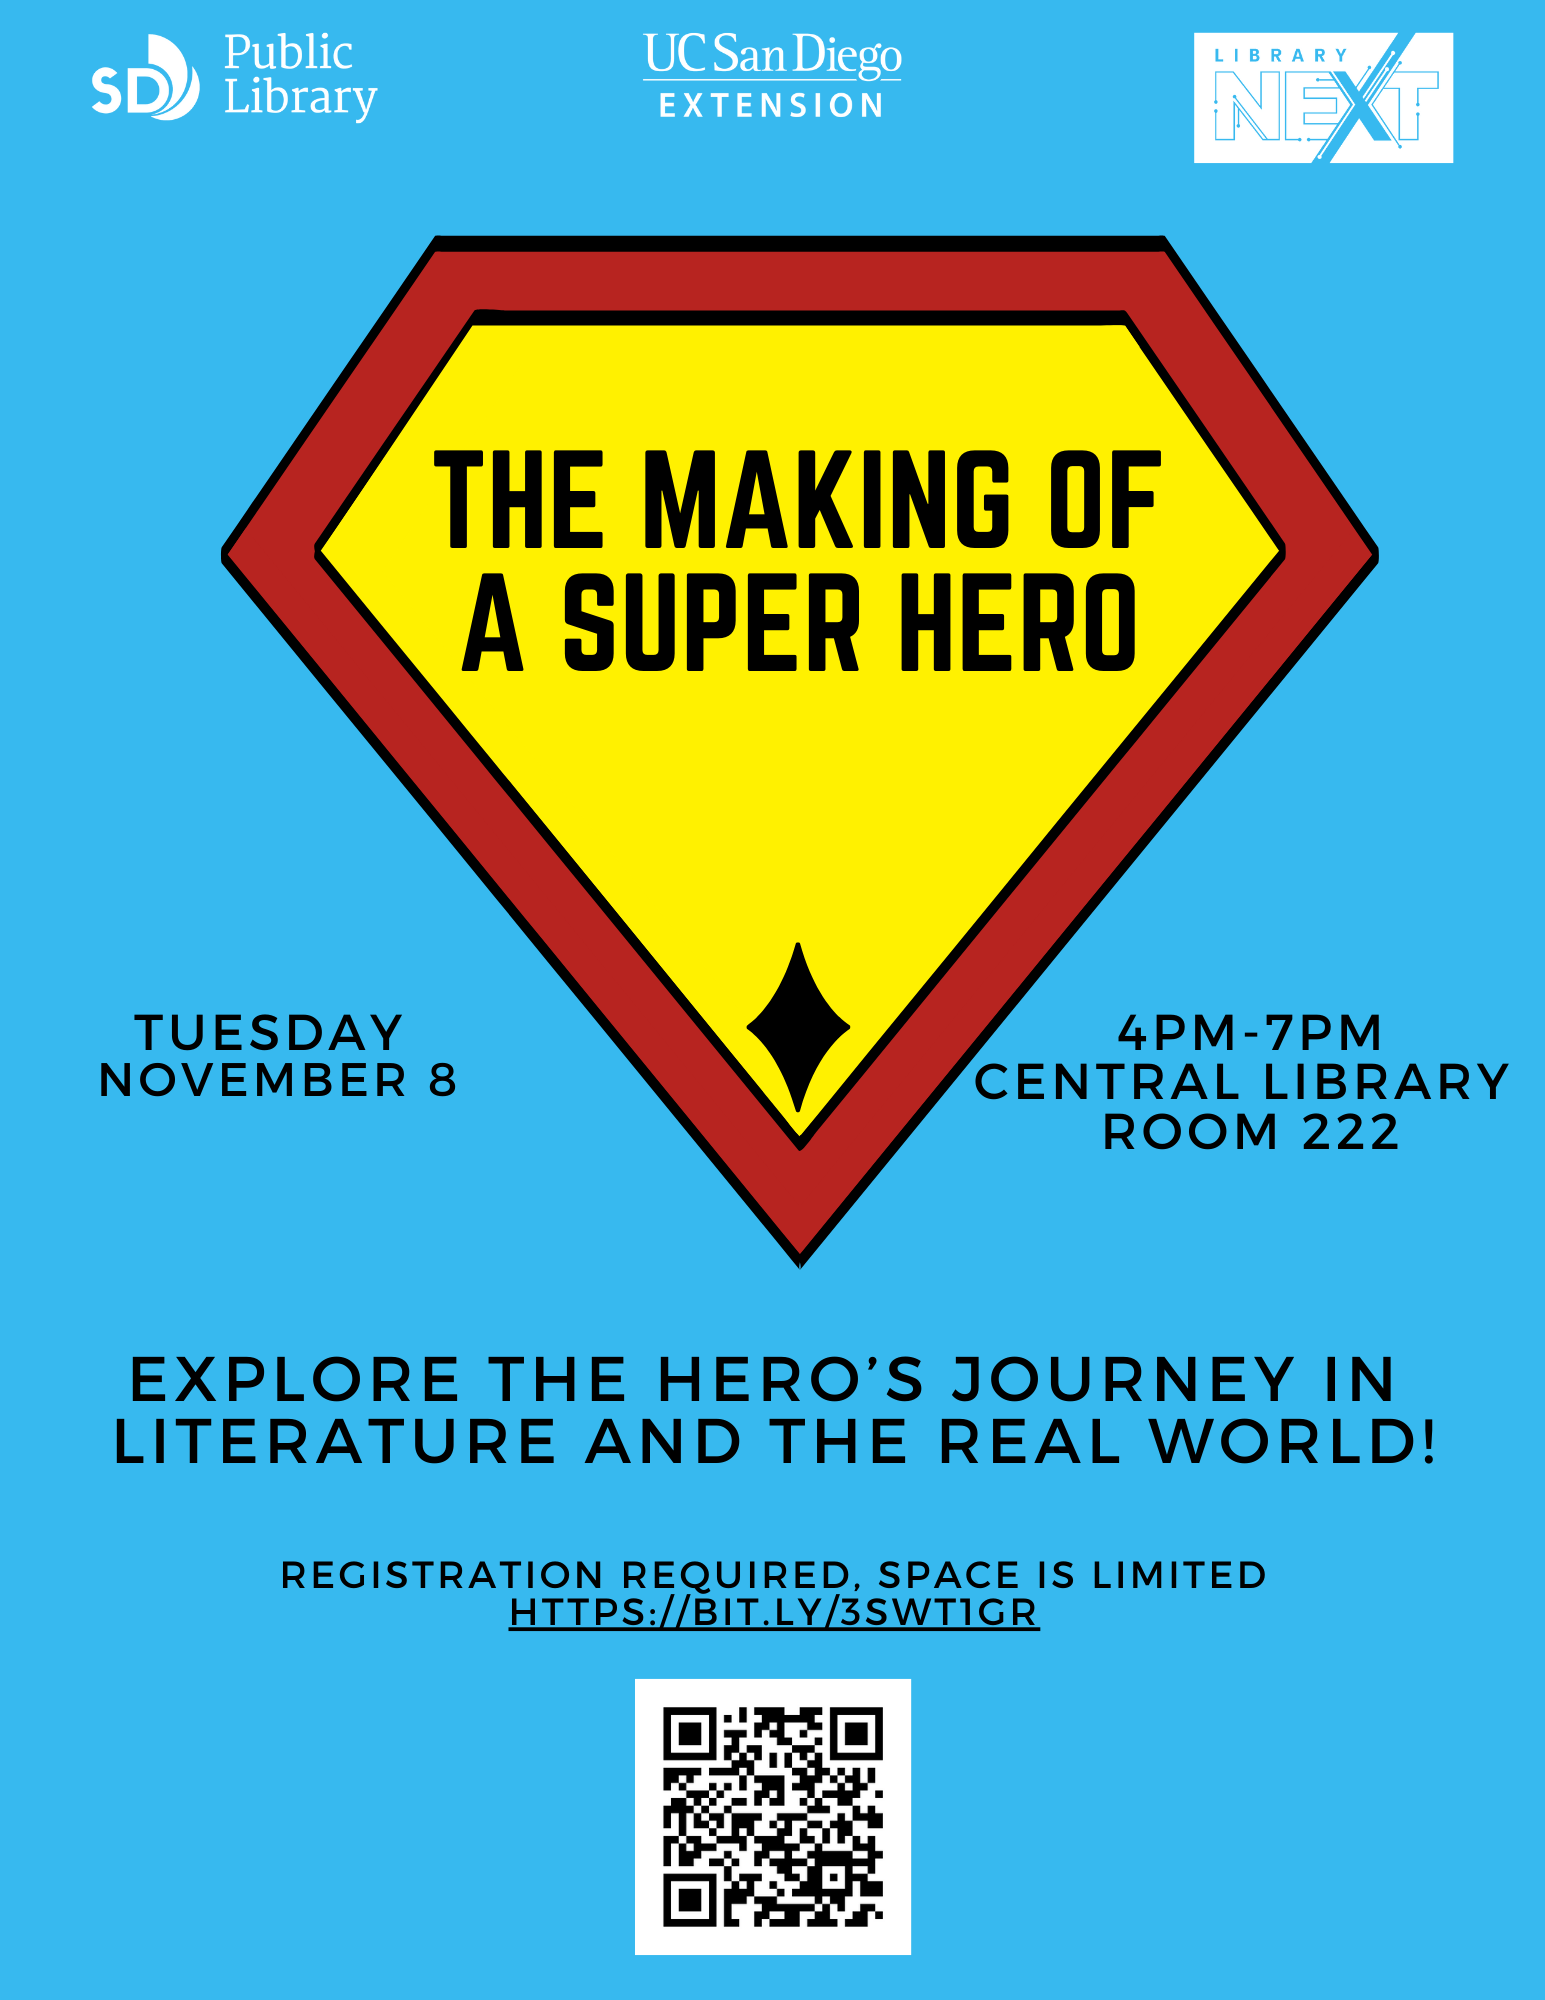 The making of a super hero. November 8. 4-7pm, Central Library, room 222. Explore the hero's journey in literature and real life. Registration required, space is limited. https://bit.ly/3SWT1GR 